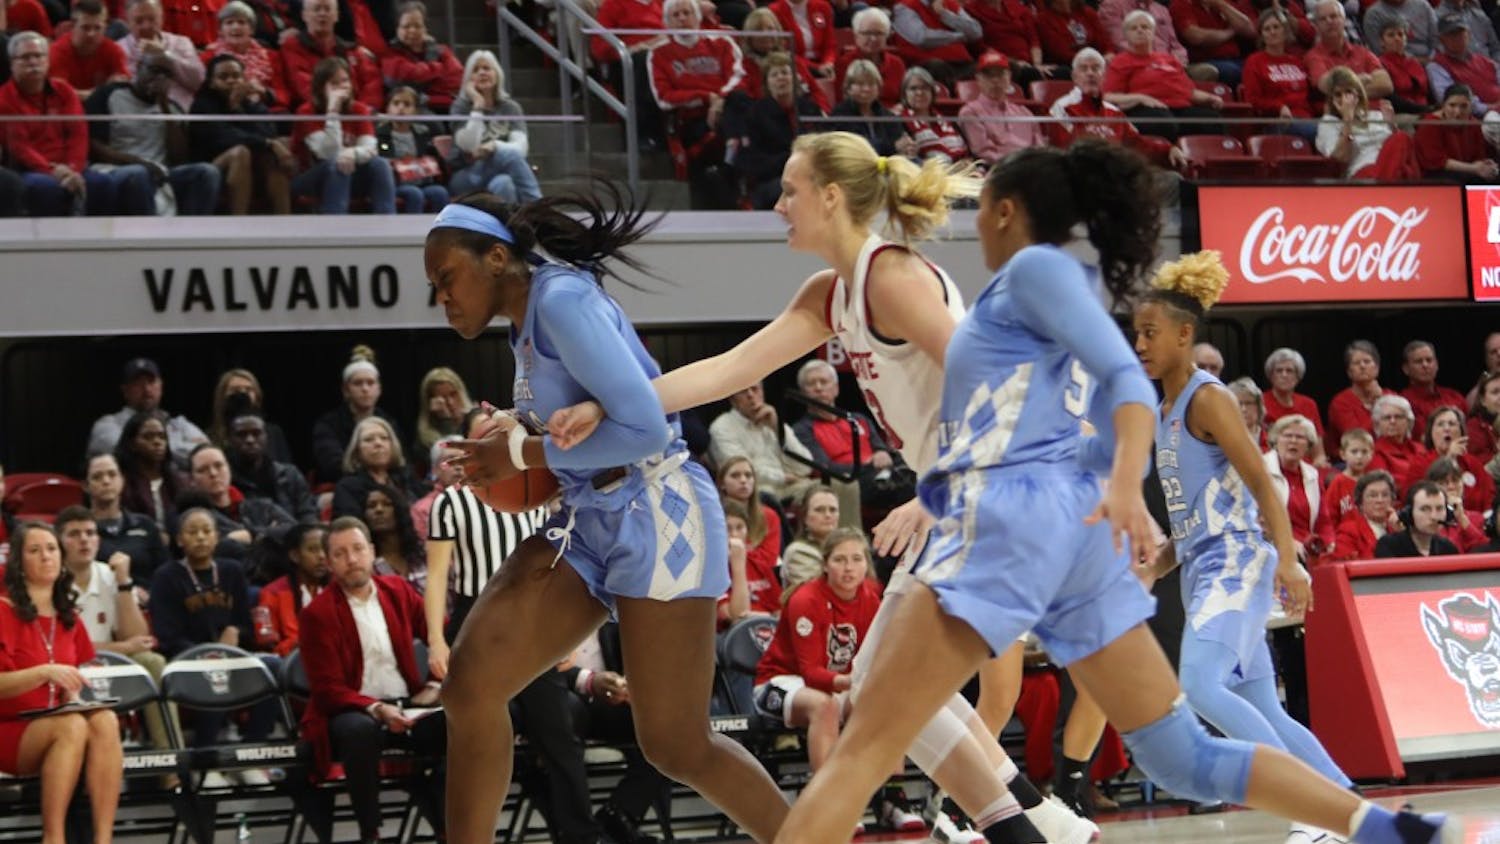 With win over undefeated N.C. State, UNC women's basketball continues to earn respect